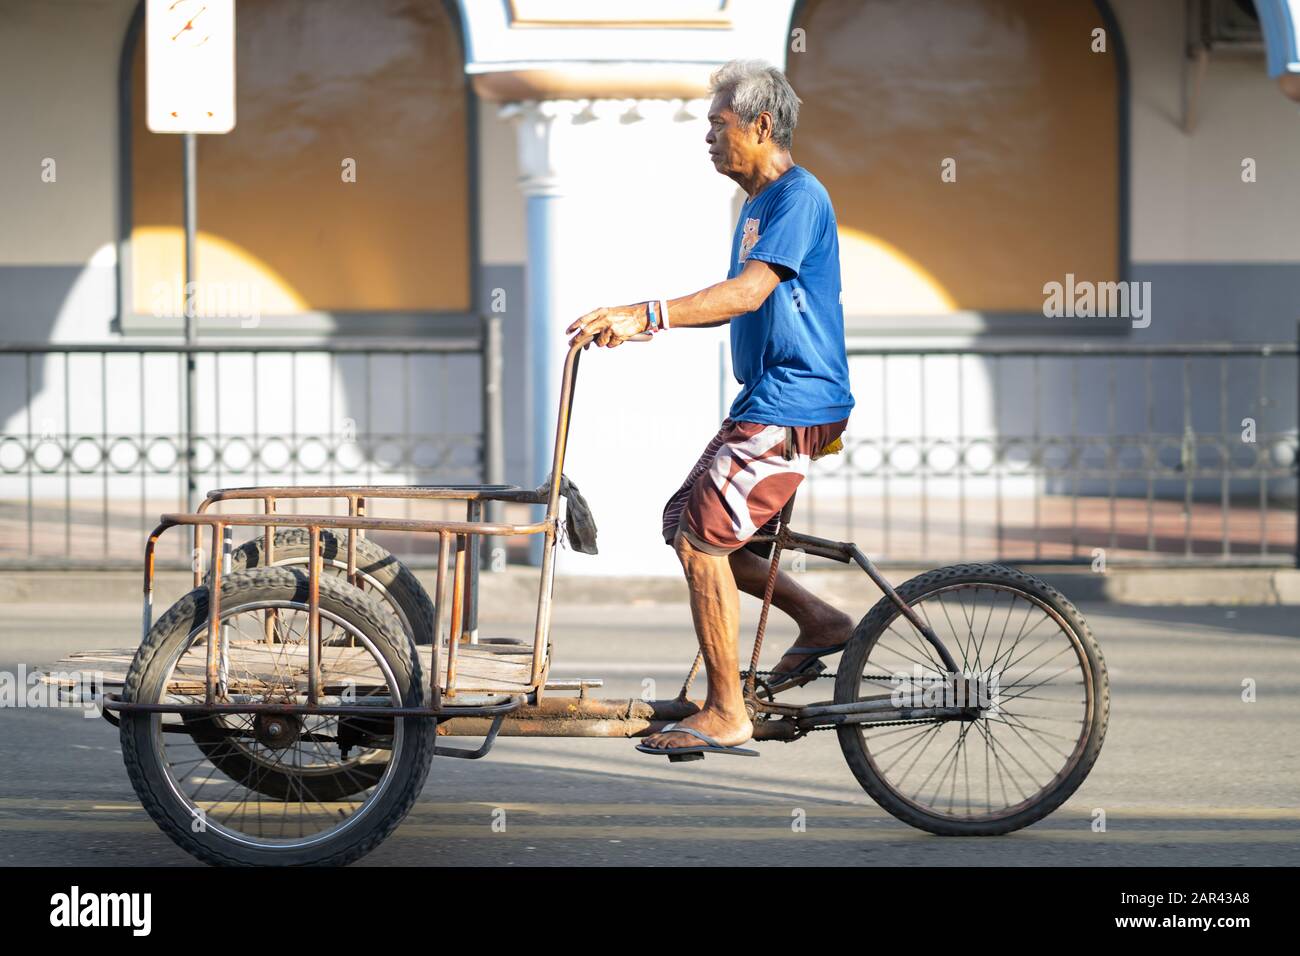 A man pedals an improvised tricycle within a market area of Cebu City,Philippines Stock Photo